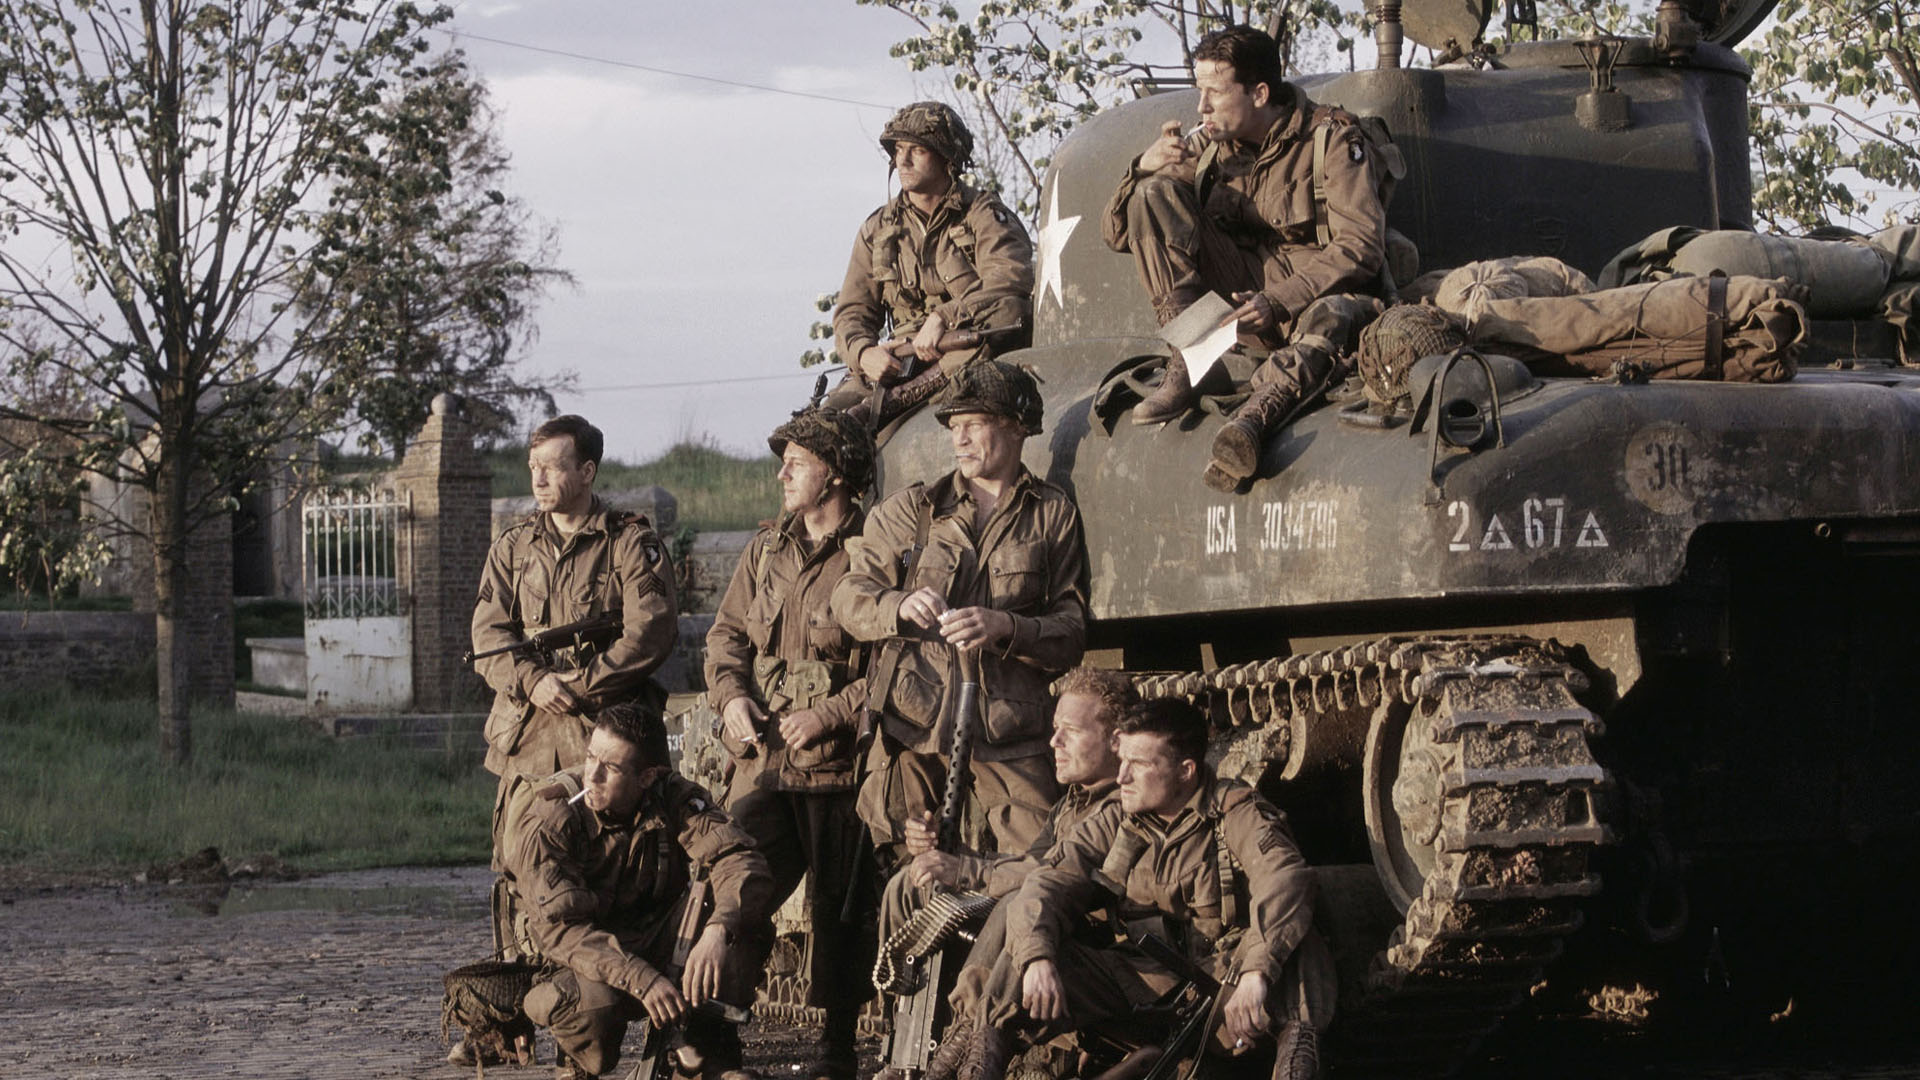 Wallpaper   Band of Brothers Wallpaper 32444151